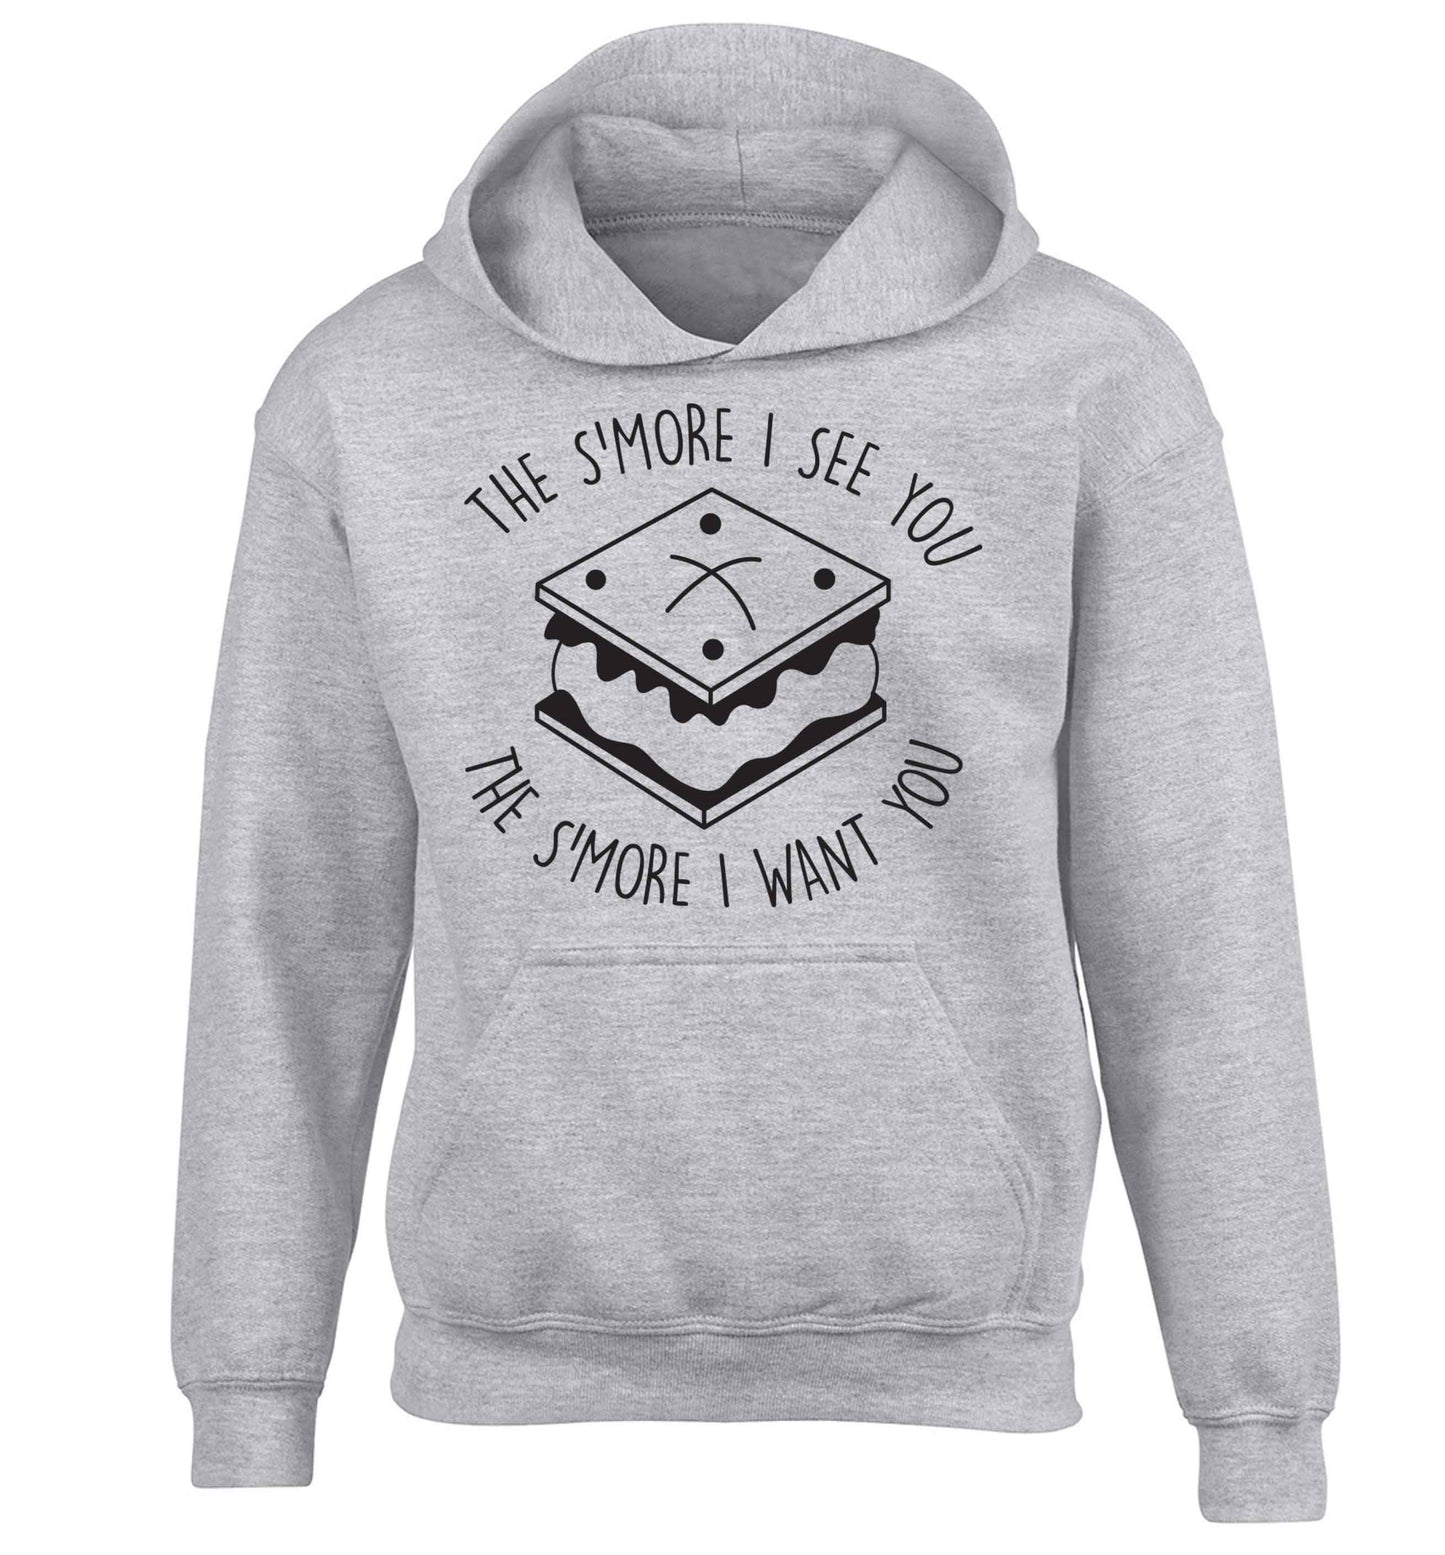 The s'more I see you the s'more I want you children's grey hoodie 12-13 Years